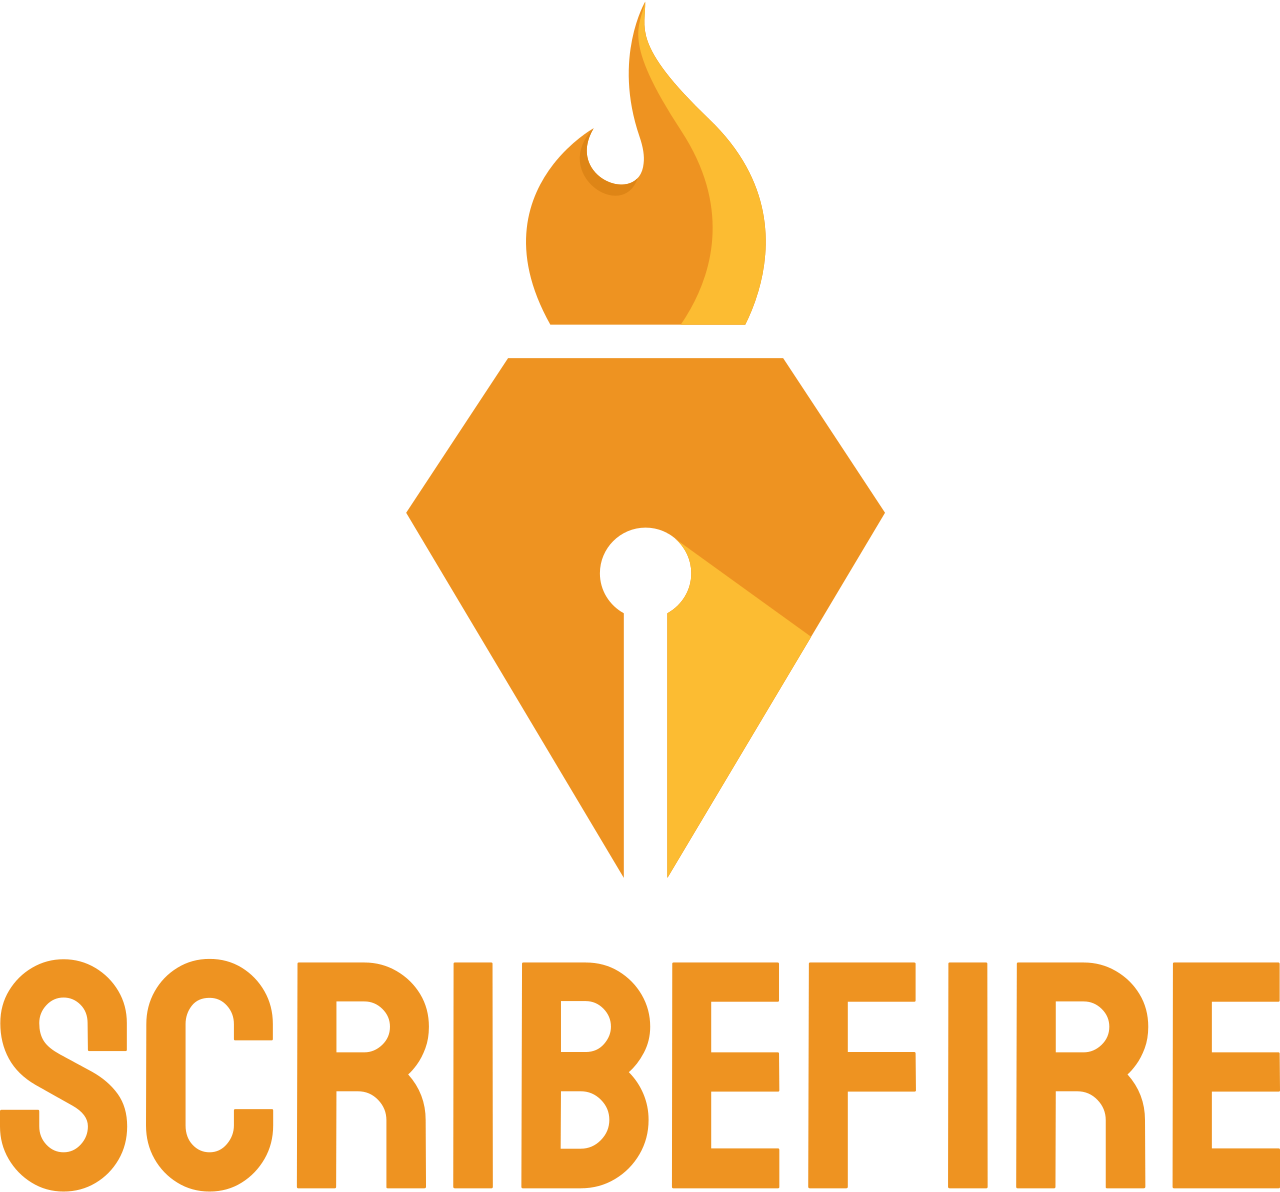 ScribeFire Content Writing's web page